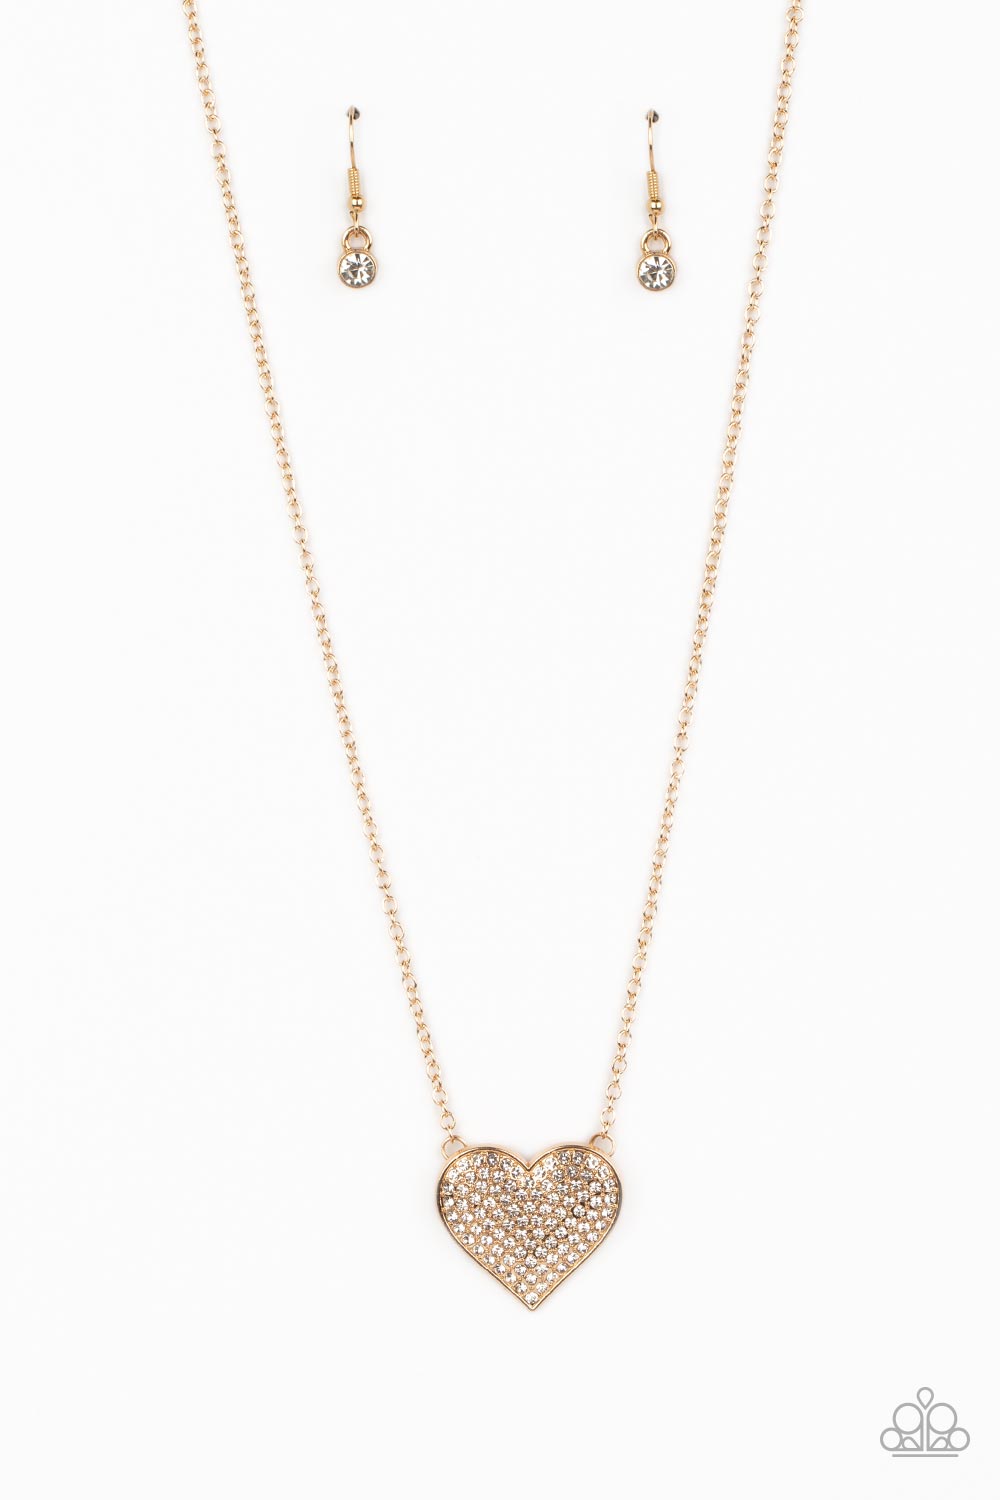 Spellbinding Sweetheart Gold &amp; White Rhinestone Heart Necklace - Paparazzi Accessories- lightbox - CarasShop.com - $5 Jewelry by Cara Jewels